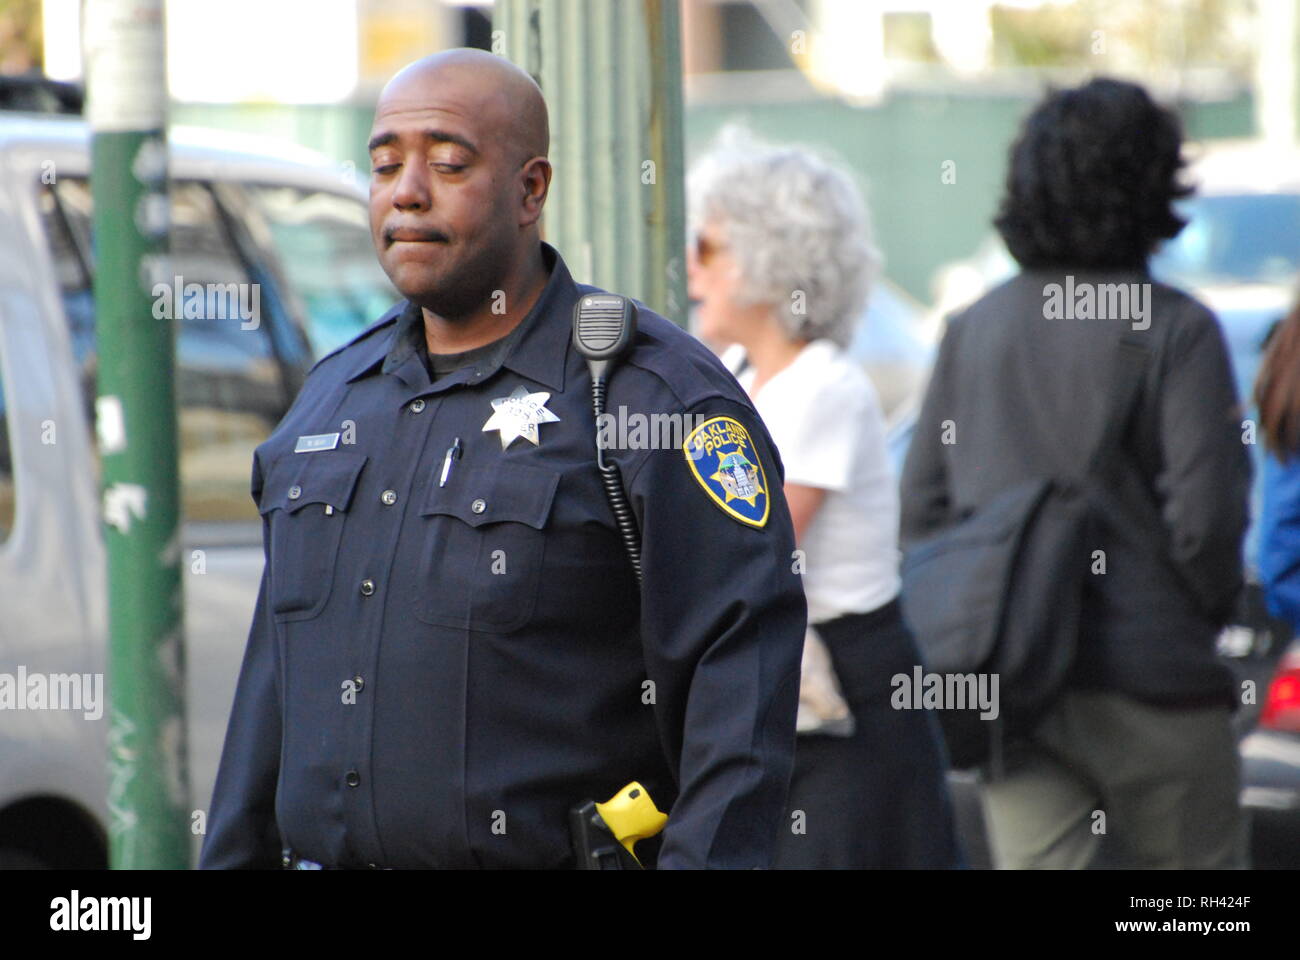 Oakland police Officer William Seay providing security outside a Kamala Harris for President rally in downtown Oakland on Jan. 27, 2019. Stock Photo